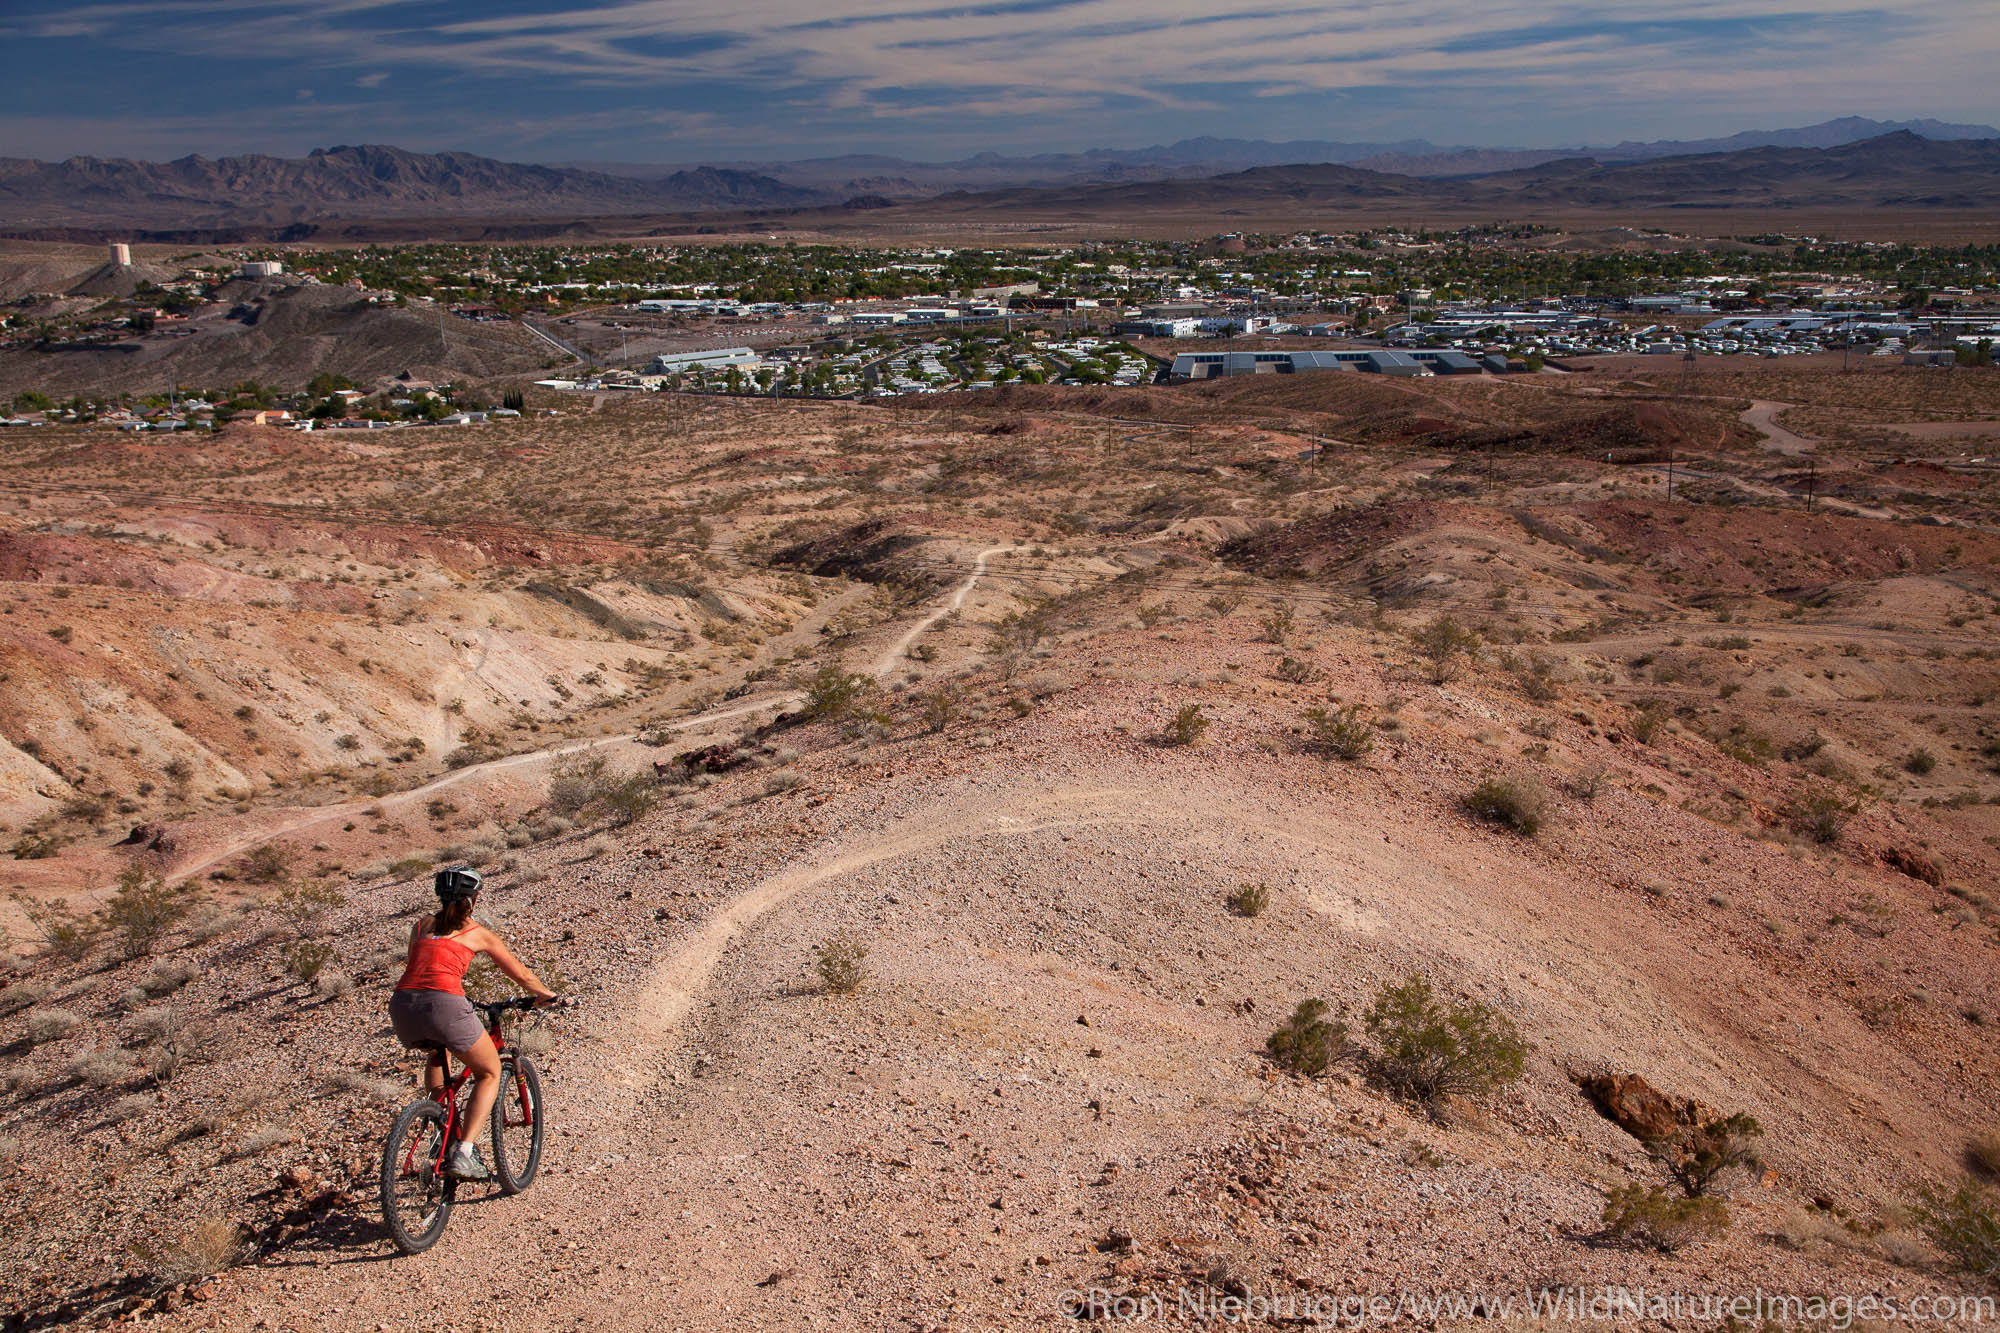 Mountain biking on the trails at Bootleg Canyon Mountain Bike Park, Boulder City, Nevada (model released)